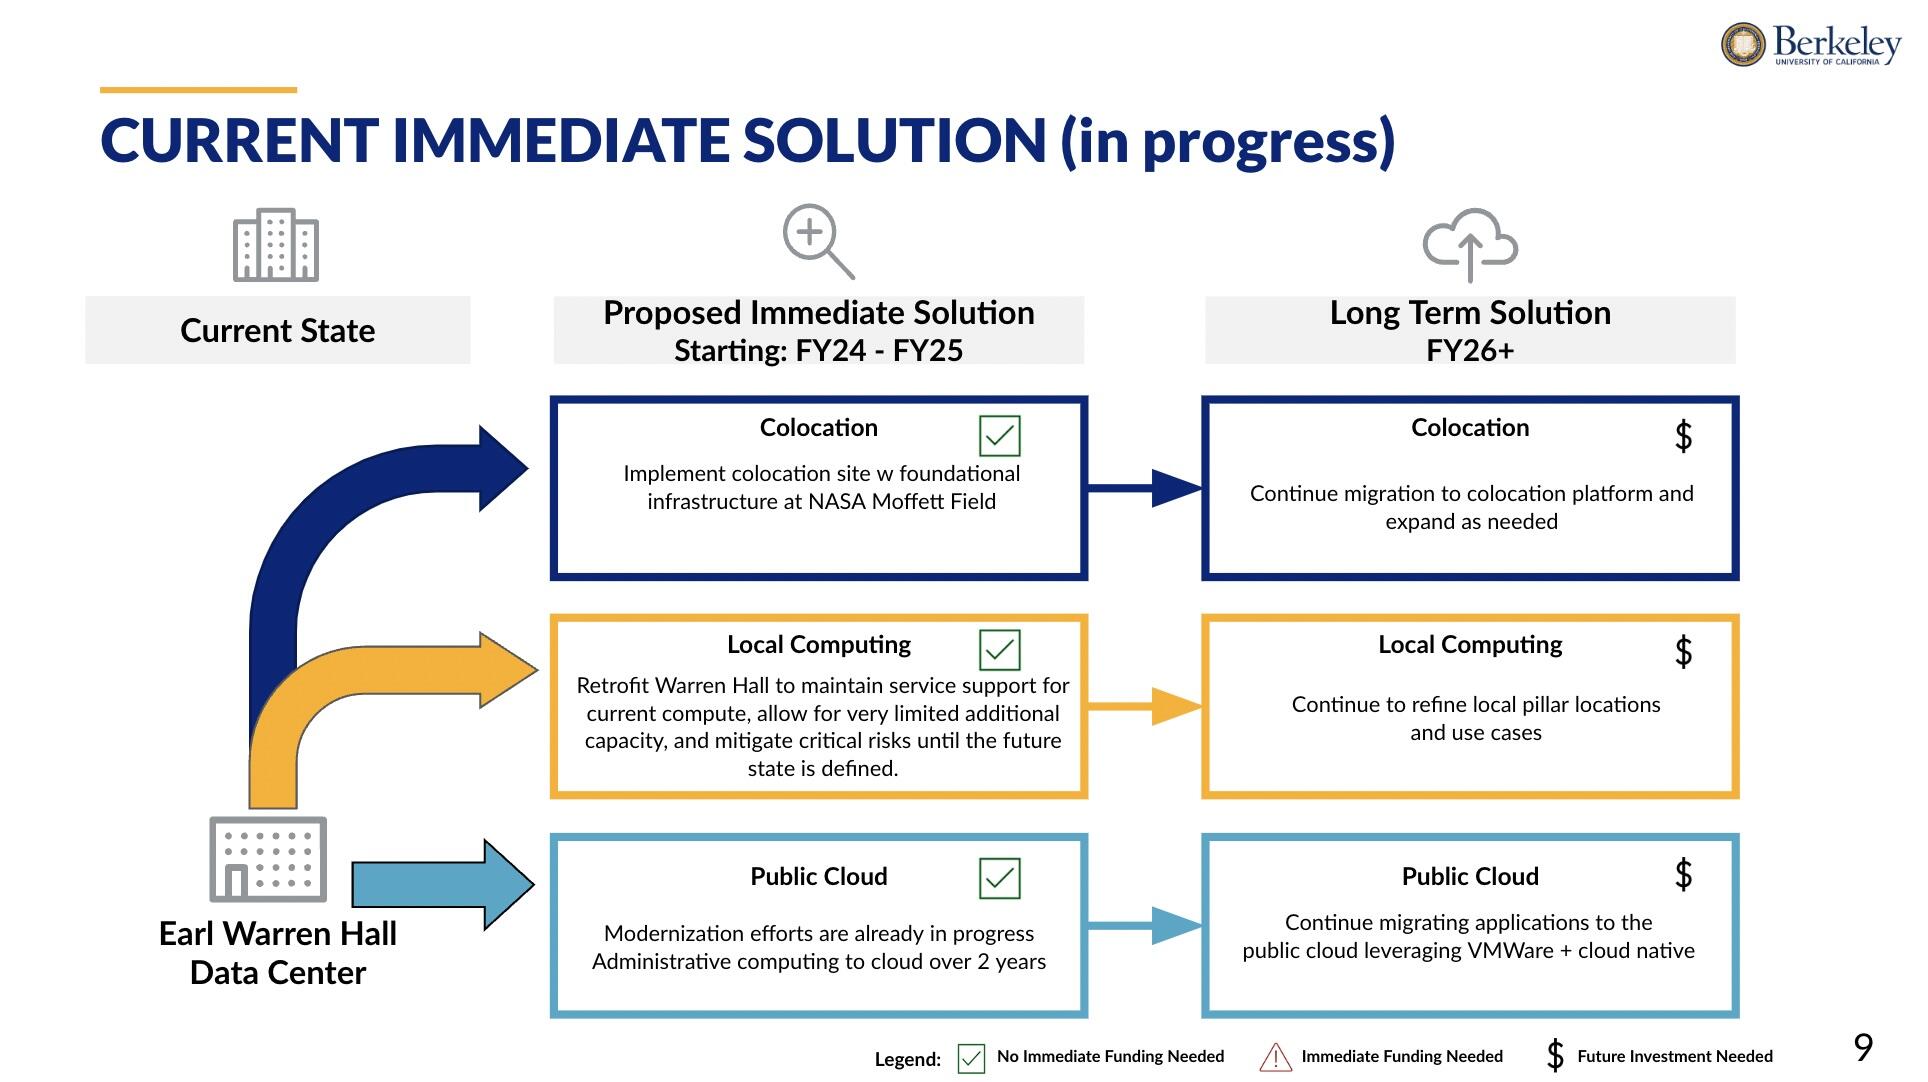 slide of 3 pillars (local, colo, cloud), citing benefits (cost, resilience) and noting plans in place for Moffett Field (colo), and expansion of public cloud for admin systems.